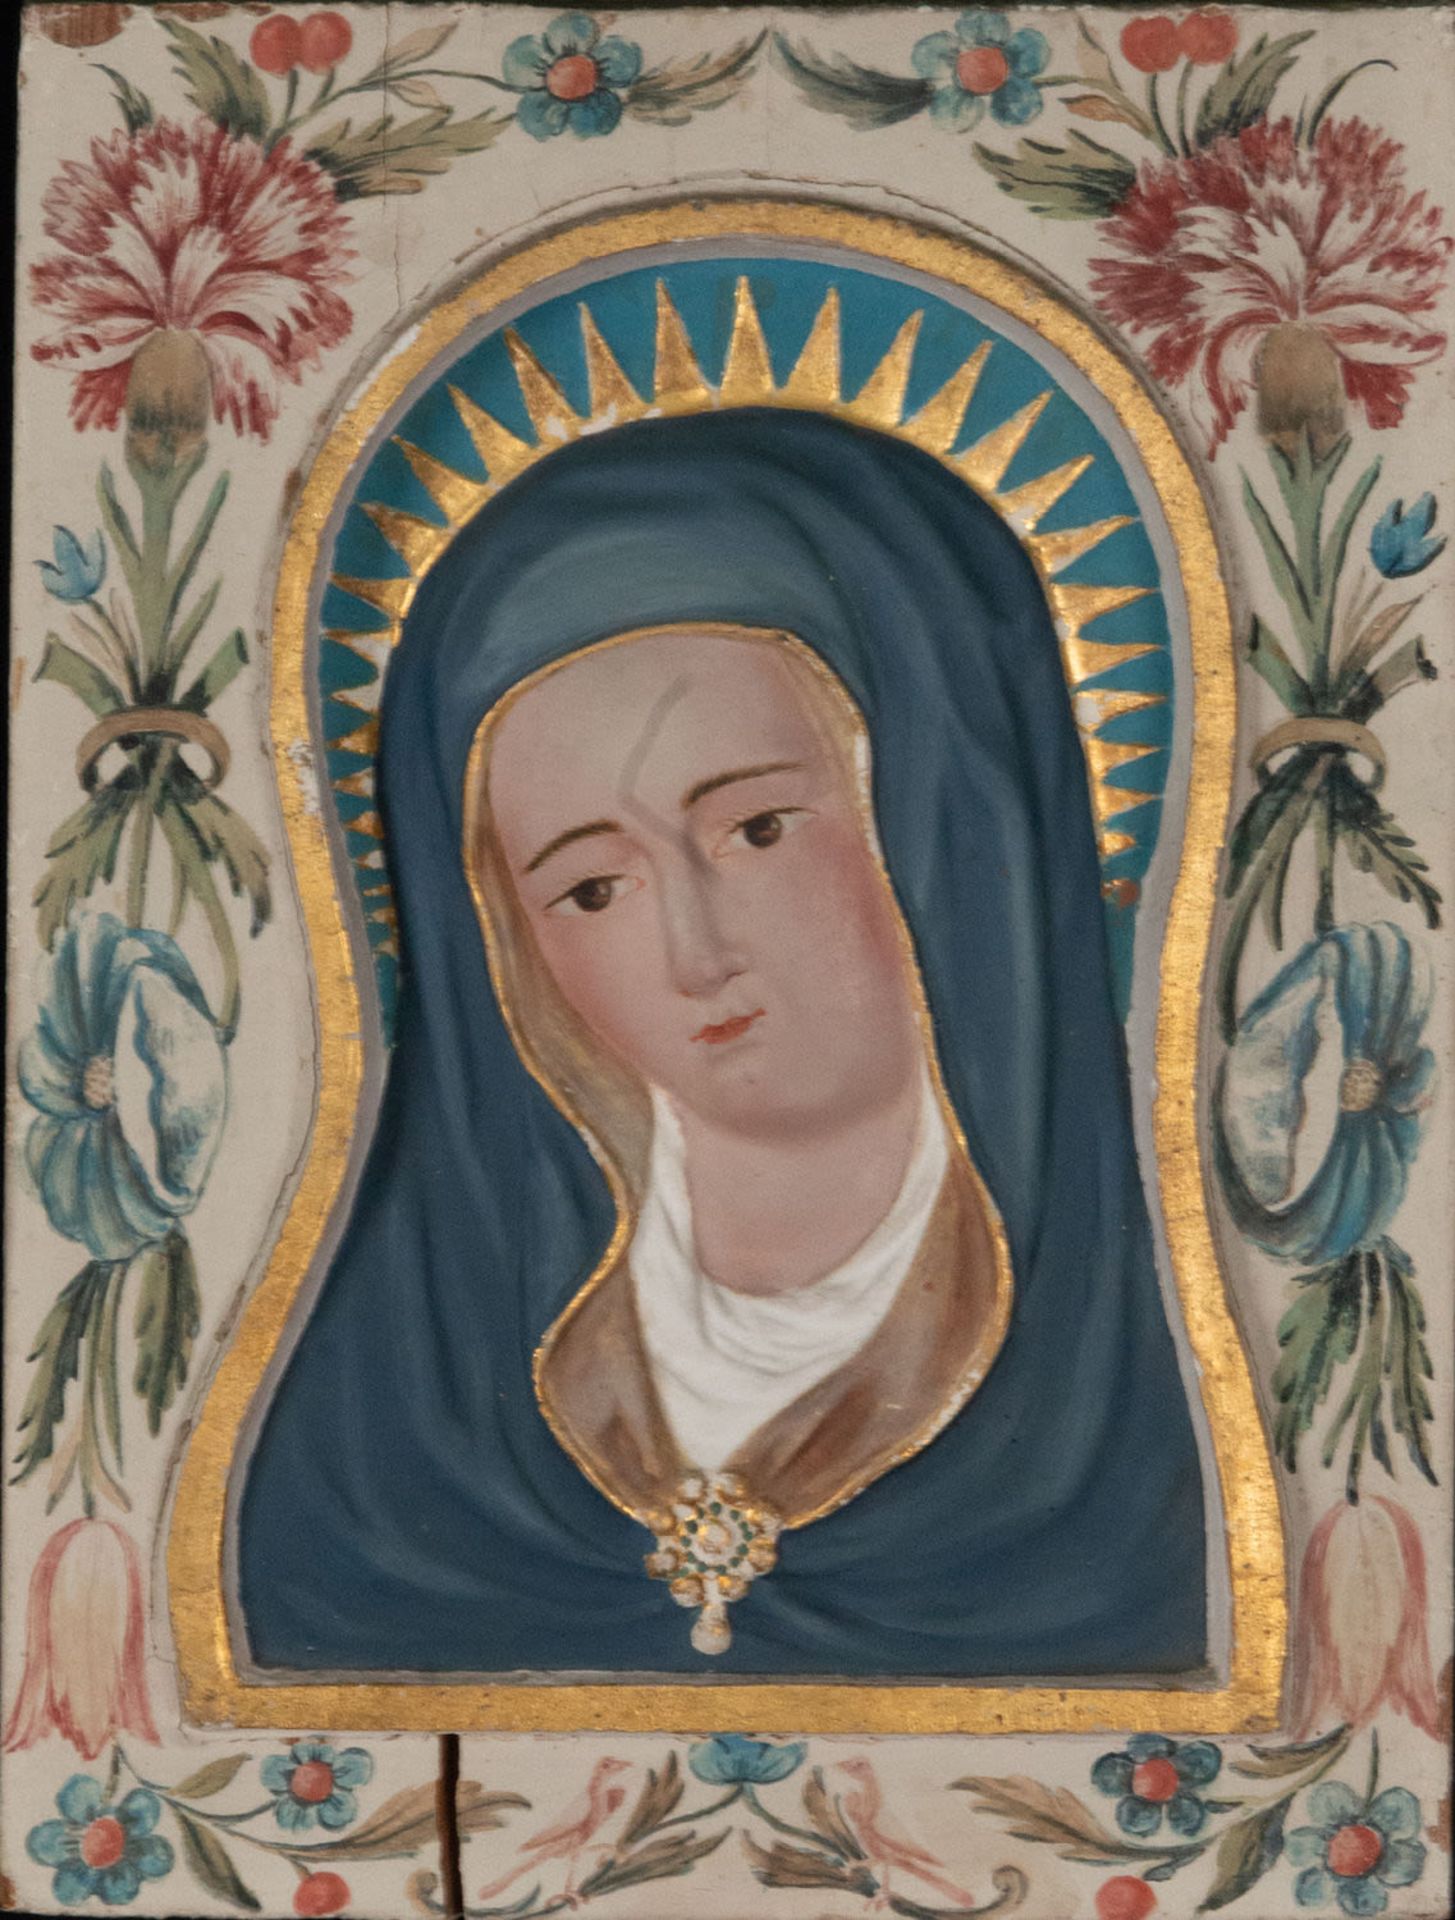 Beautiful Mexican Colonial Icon of "Dolora", New Spanish colonial, 18th century